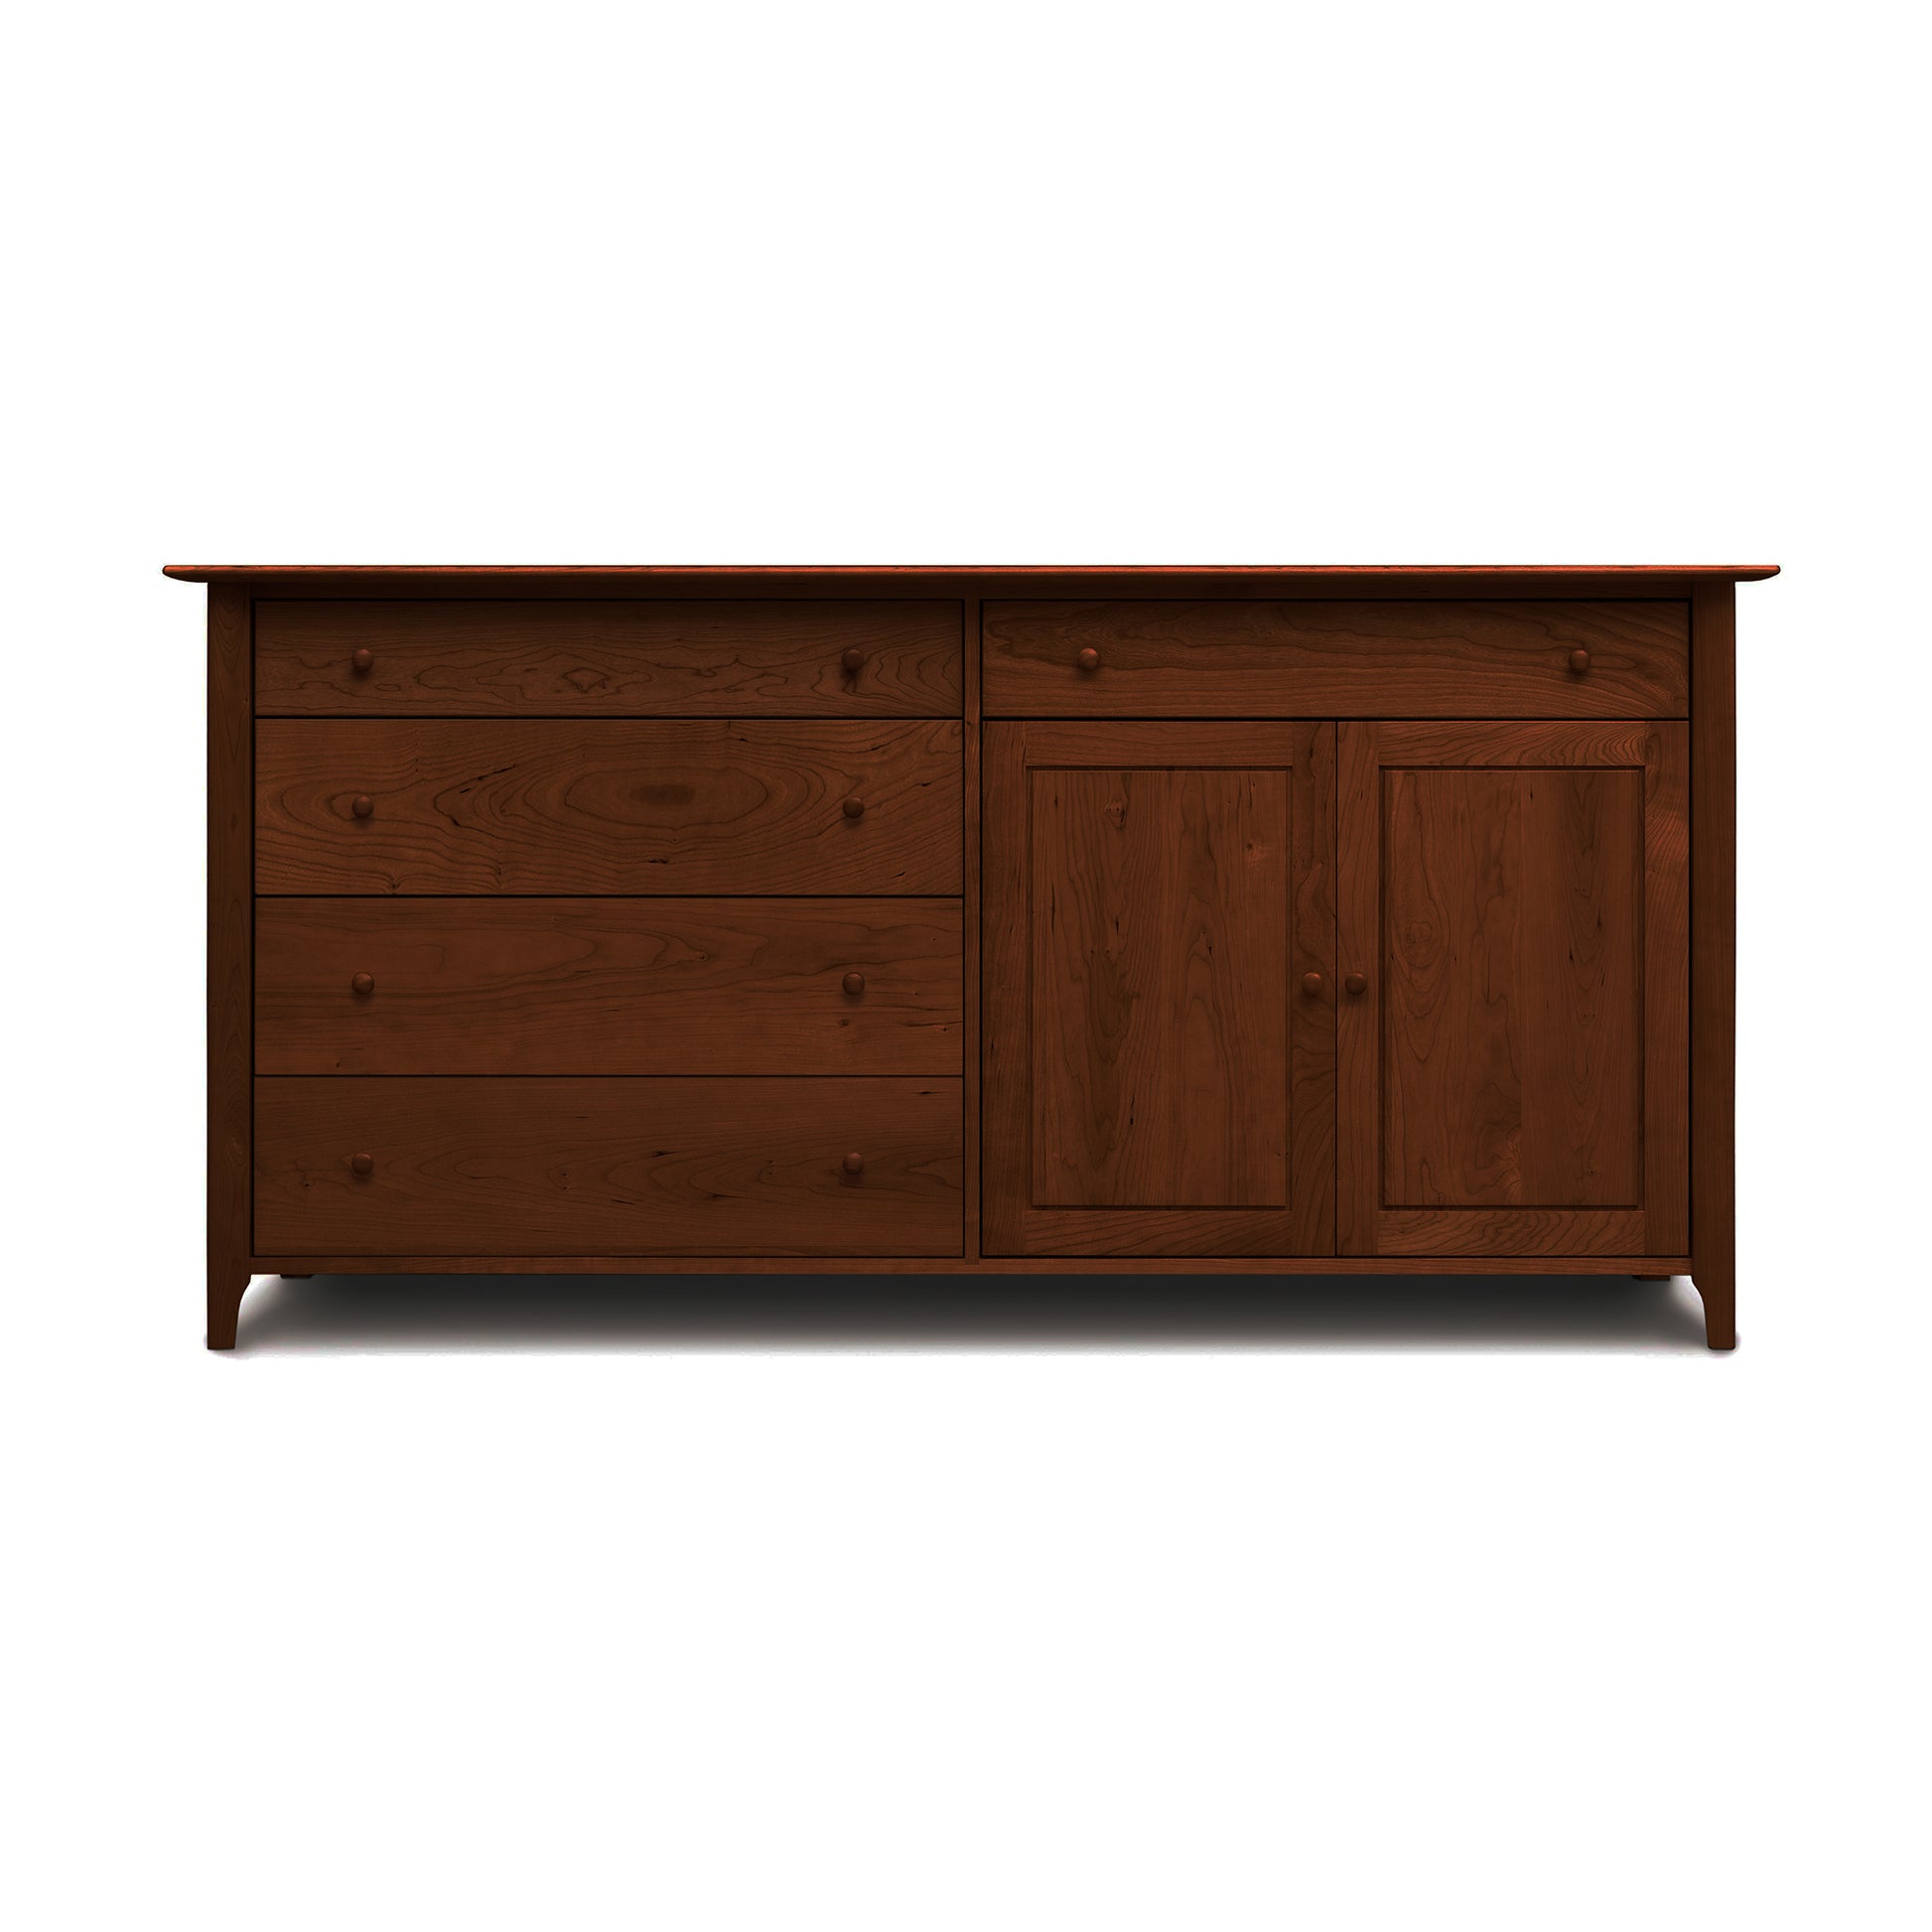 Copeland Furniture's Sarah 2 Door, 5 Drawer Buffet, a luxury dining furniture piece, with three drawers and two cabinets against a white background.